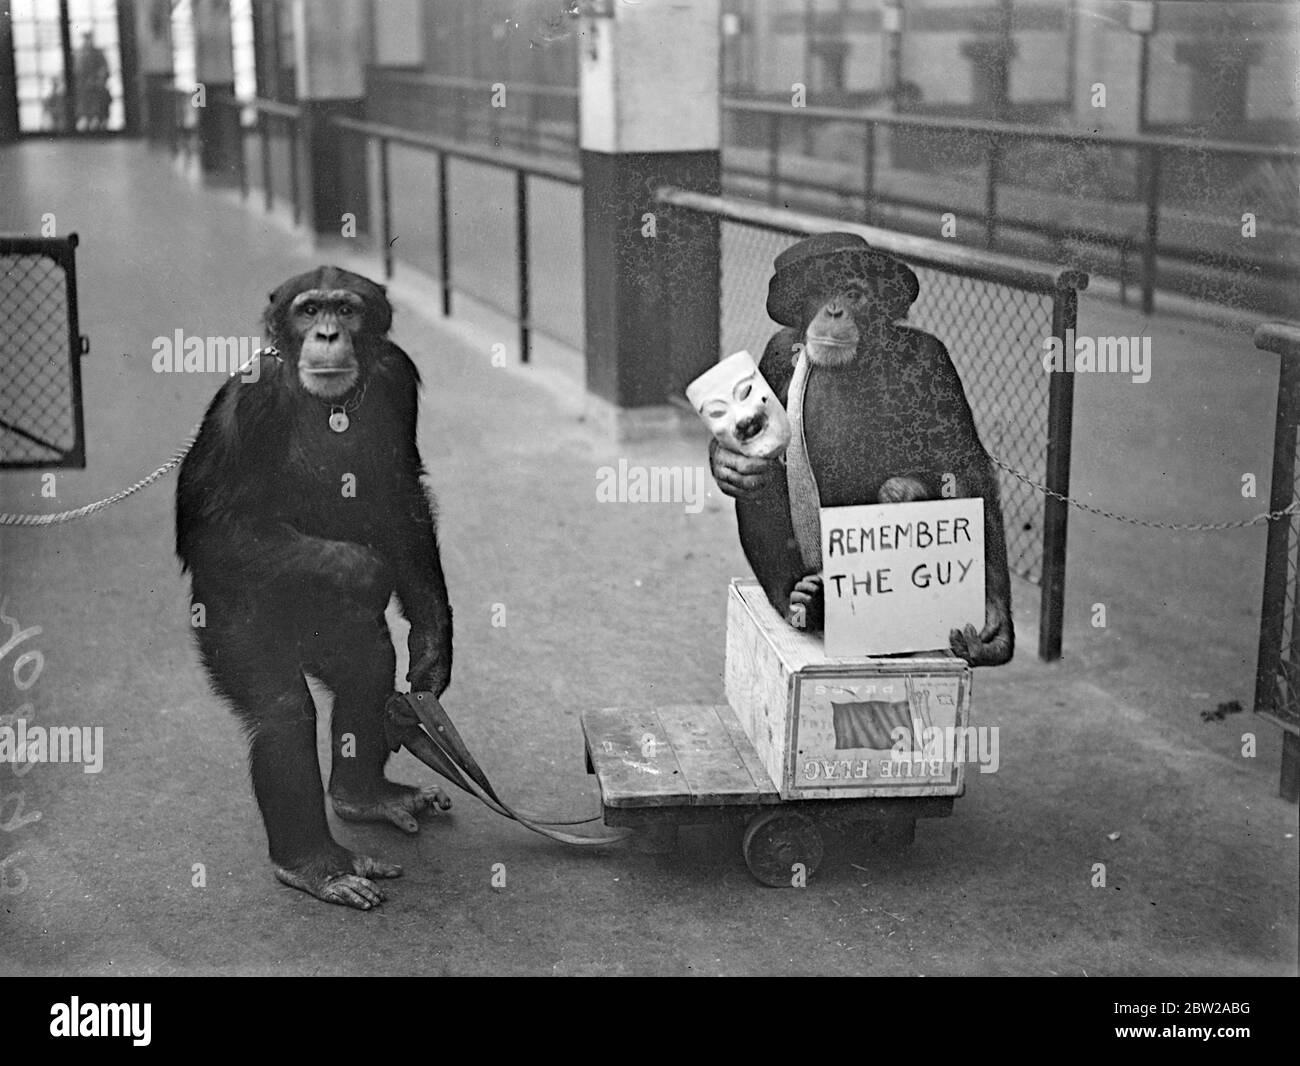 Zoo chimps go out with the 'Guy!'. Equipped with an old hat, a mask and a notice to 'Remember the Guy' Peter and Jackie, the London Zoo chimpanzees ventured out of their enclosure in the hope of augmenting their fireworks fund for 5 November. Photo shows, Jackie (left) and Peter, the 'Guy', ready to waylay passers-by. 2 November1937 Stock Photo